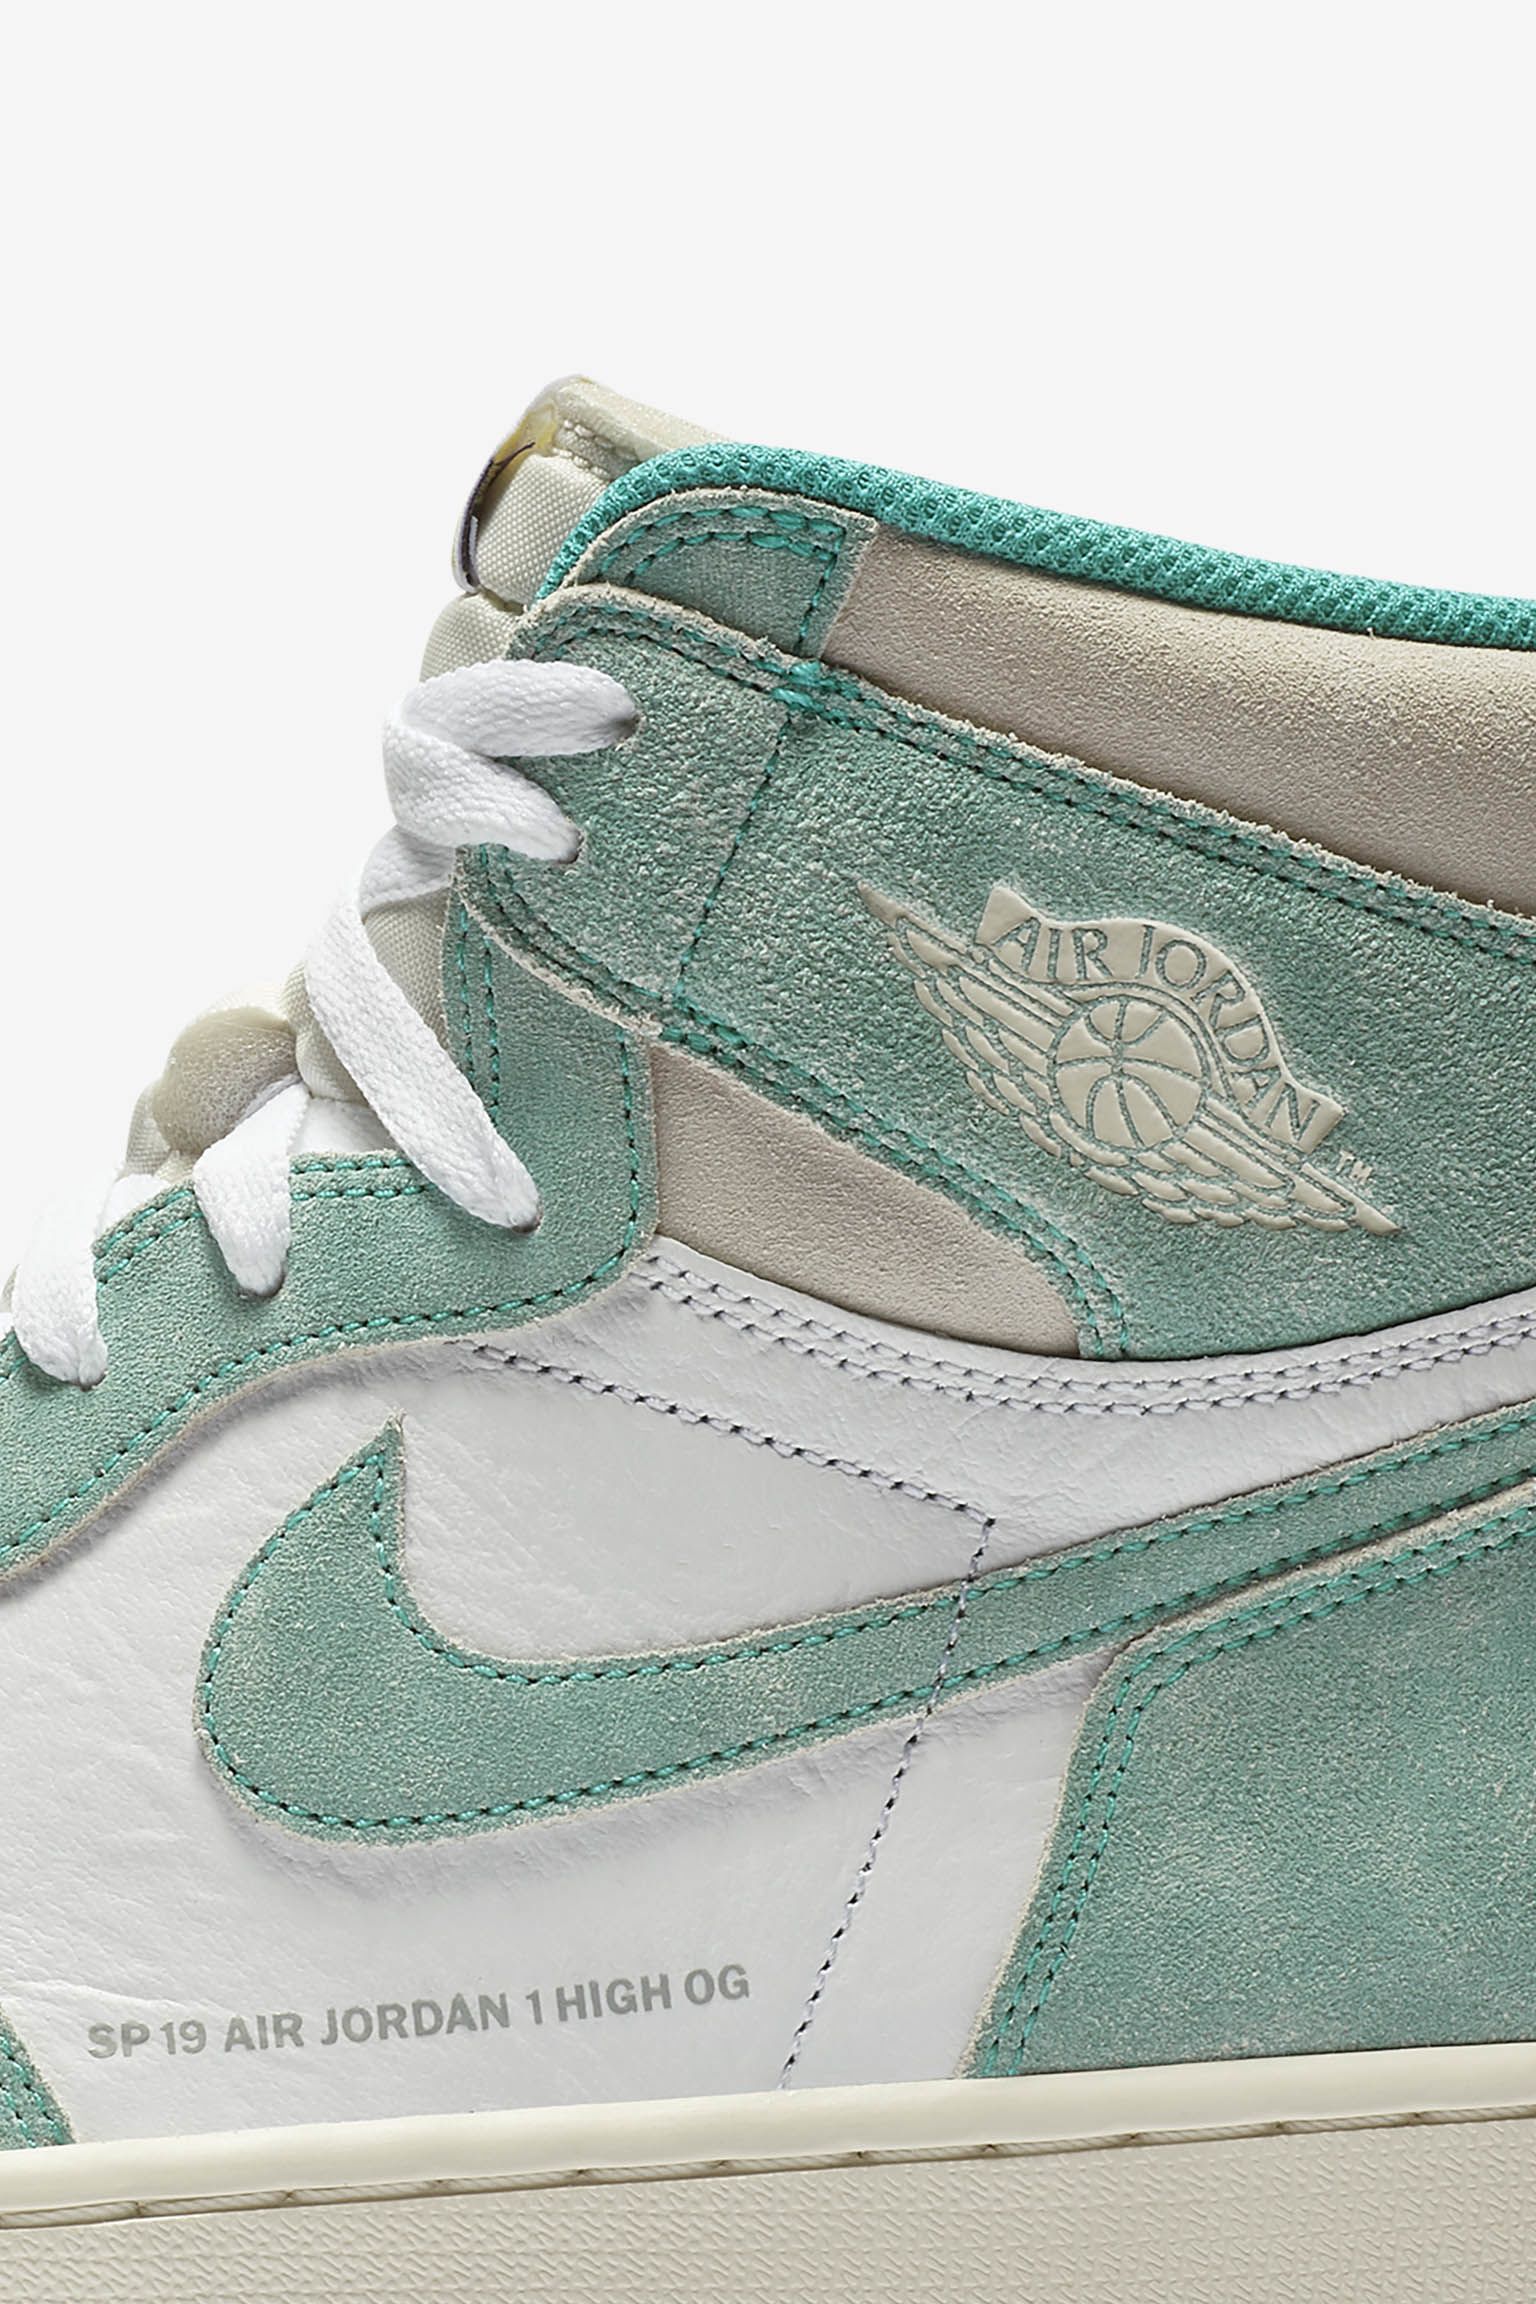 Air Jordan 1 'Turbo Green and White and 